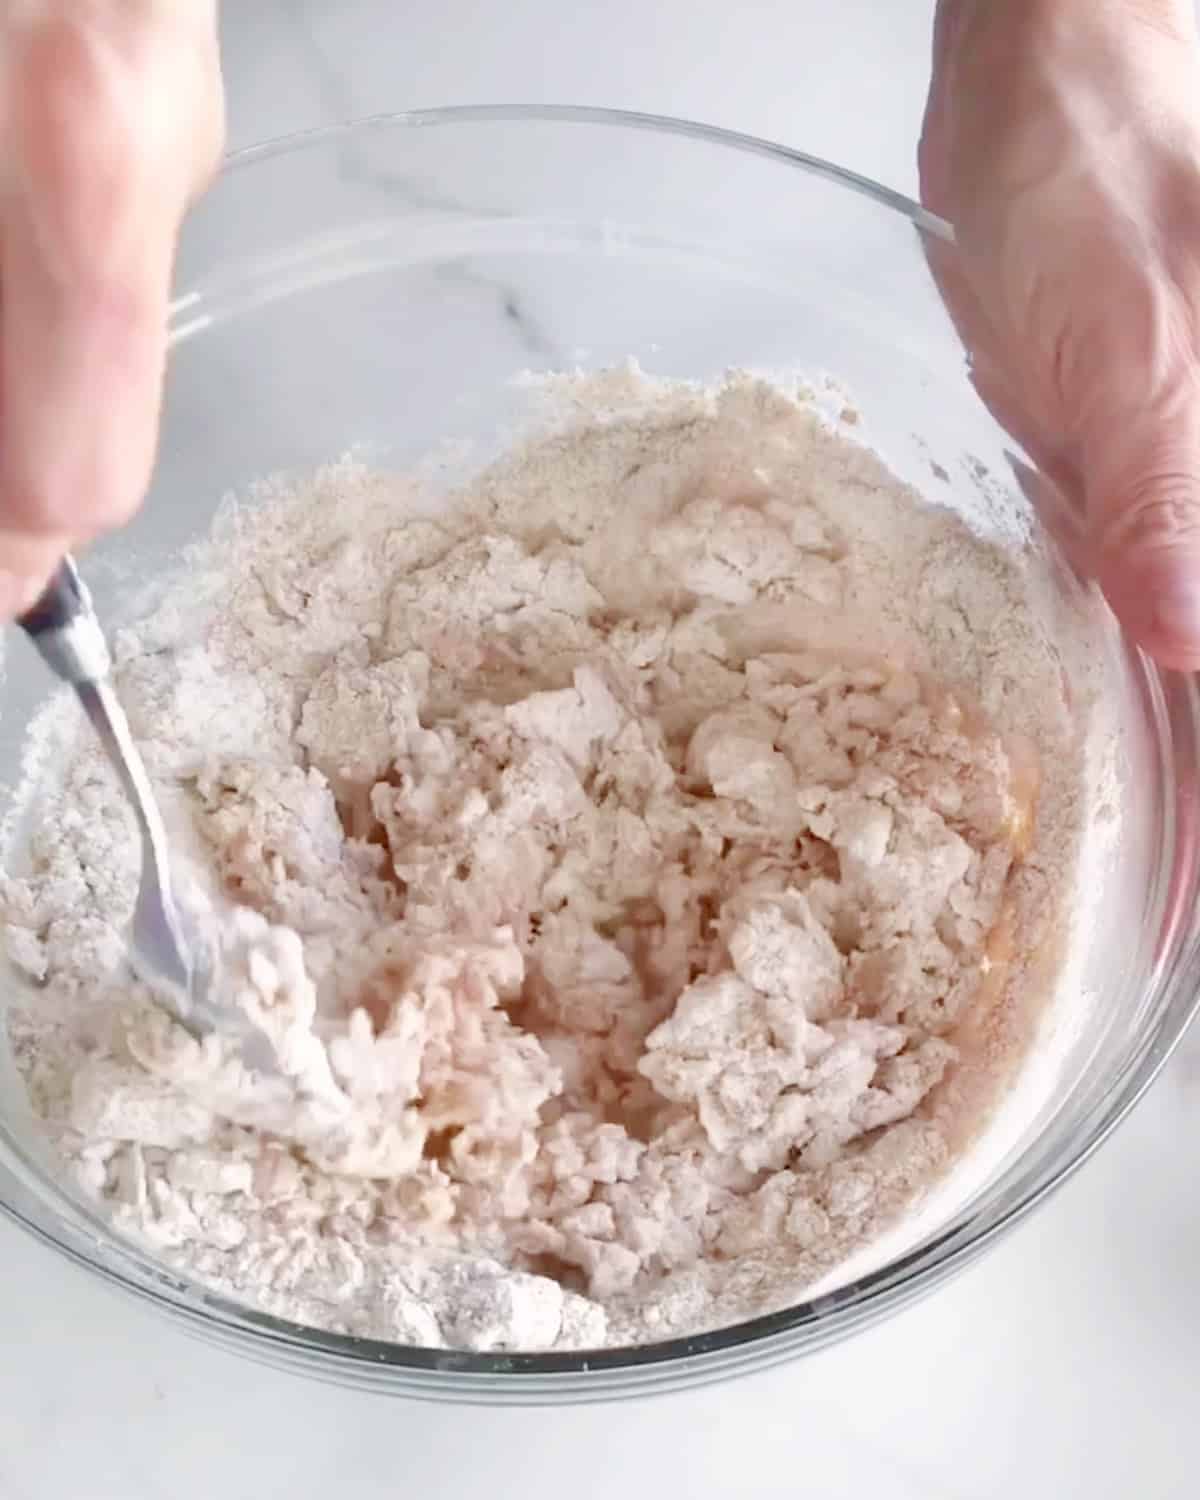 Whole wheat flour added to bread dough in a glass bowl. Hands mixing it. White marble surface.